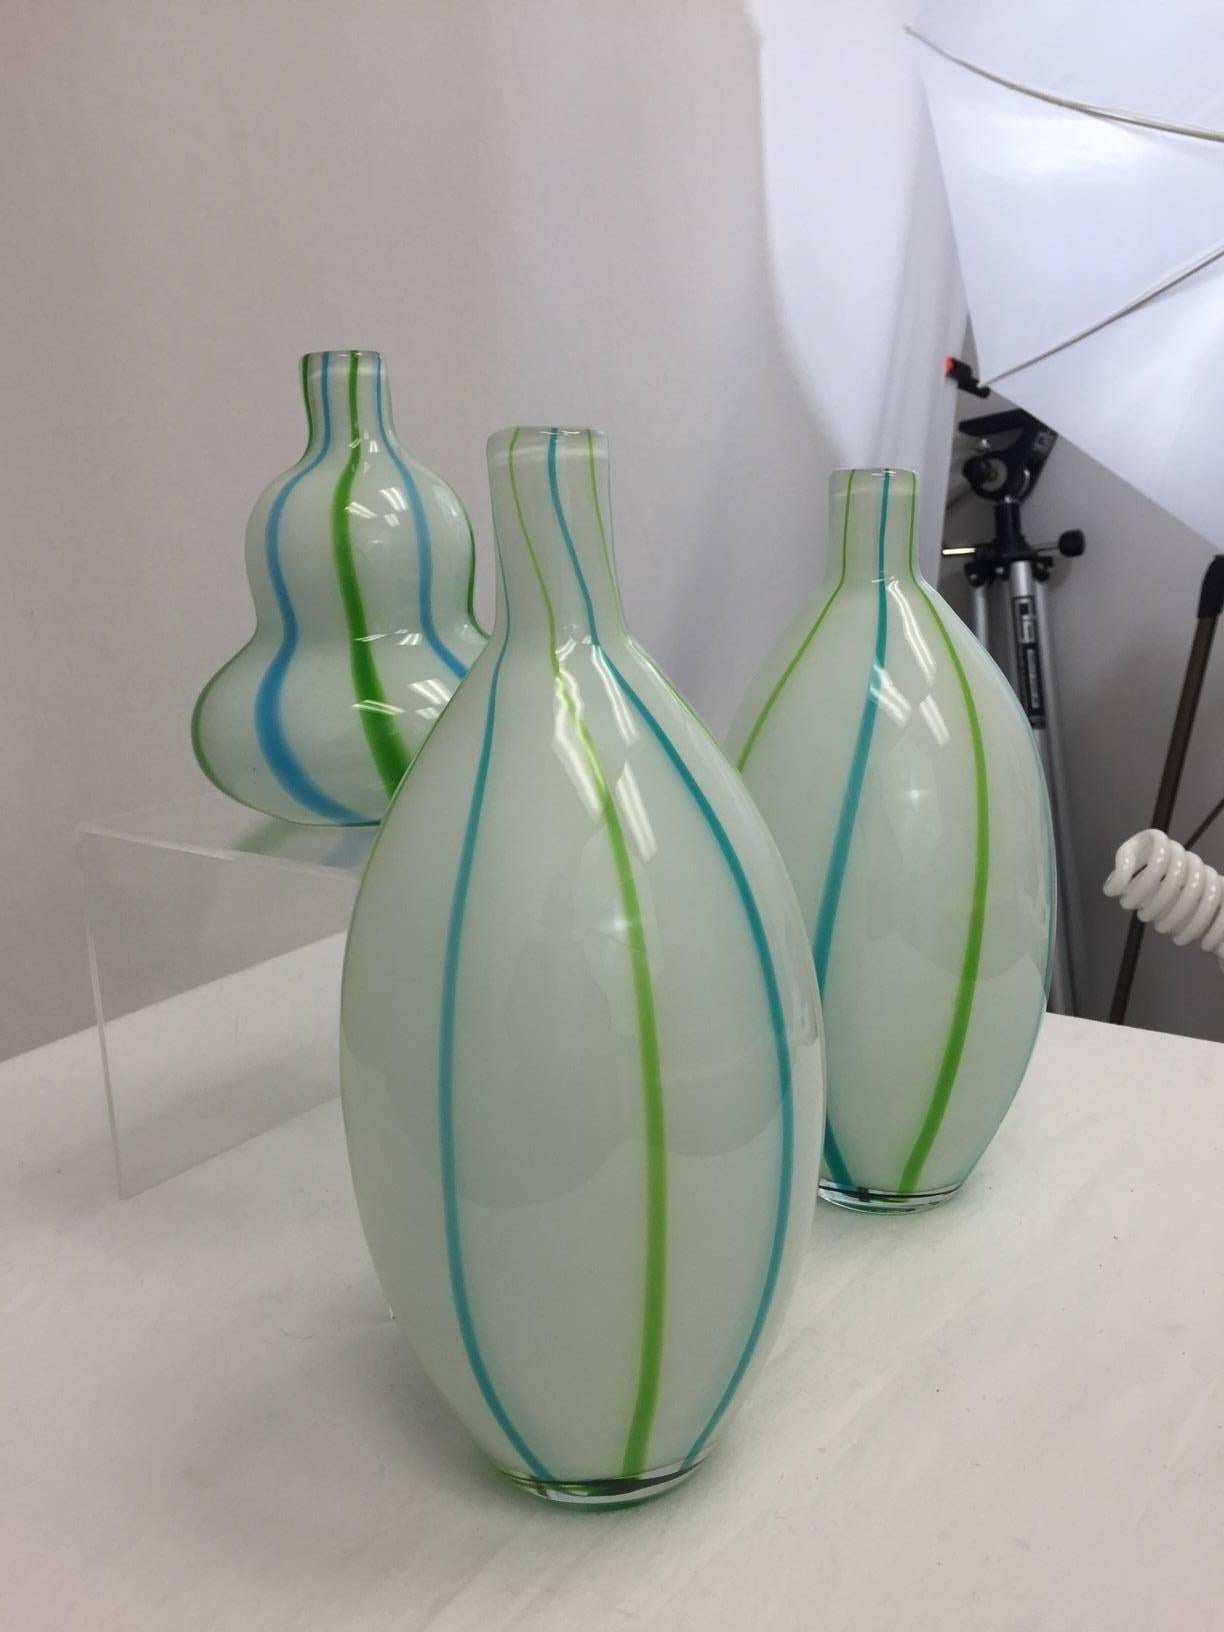 Trio of three Murano vases with grass green and turquoise stripes on opaque white glass. Measures: The tallest is 11